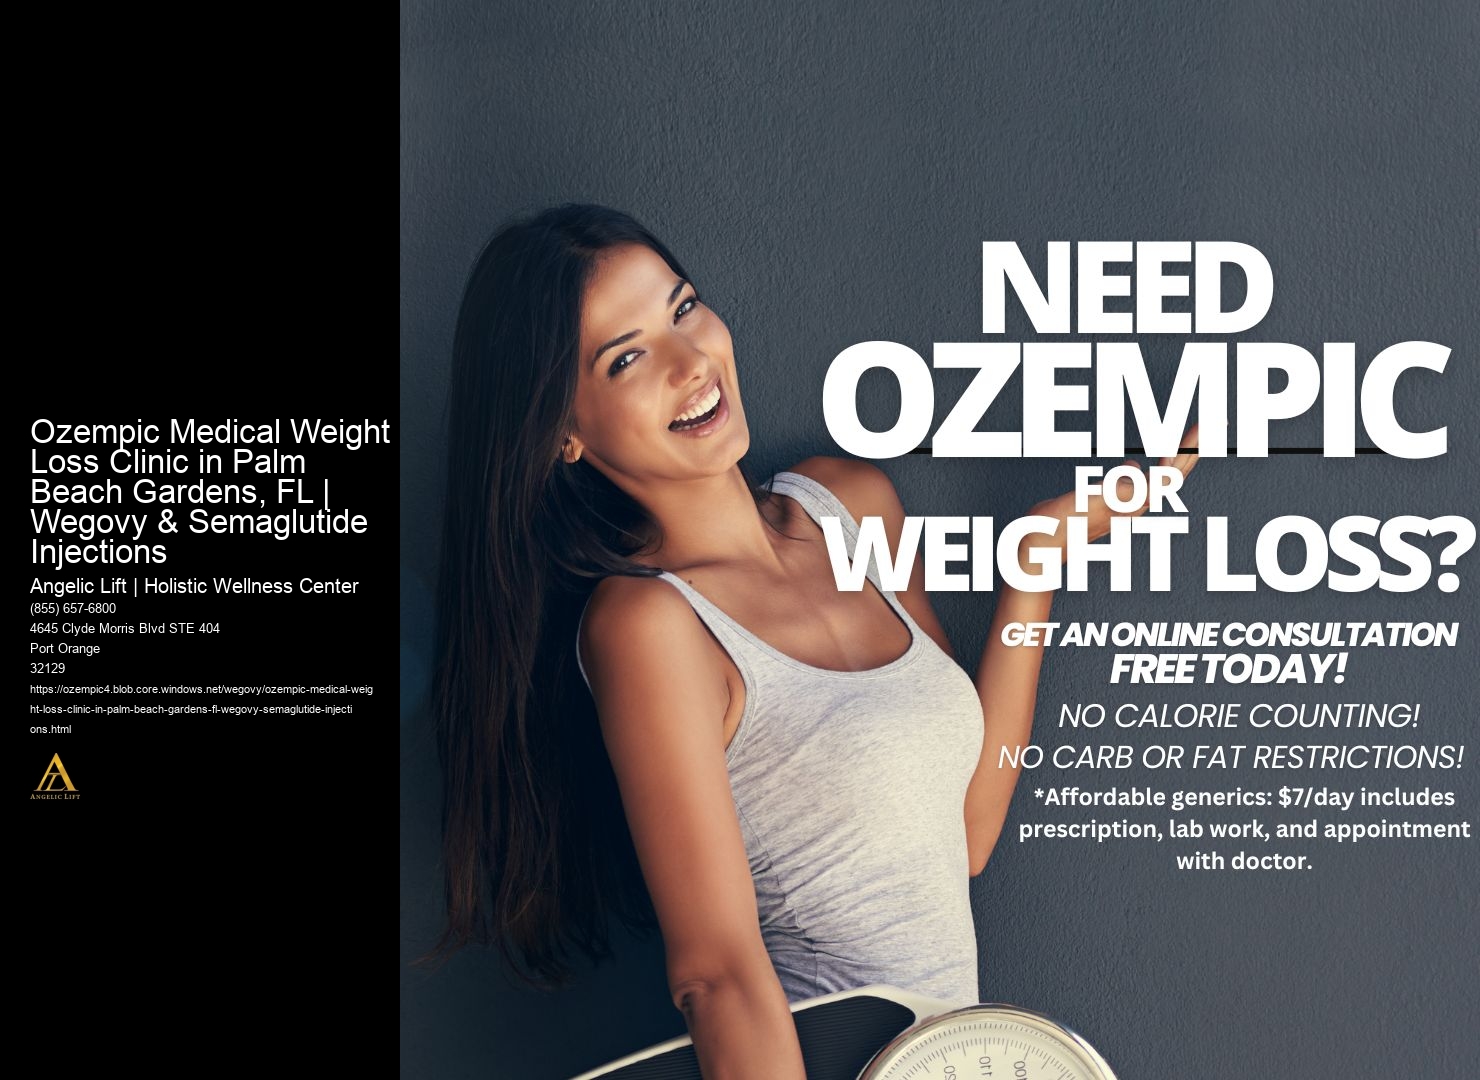 Ozempic Medical Weight Loss Clinic in Palm Beach Gardens, FL | Wegovy & Semaglutide Injections